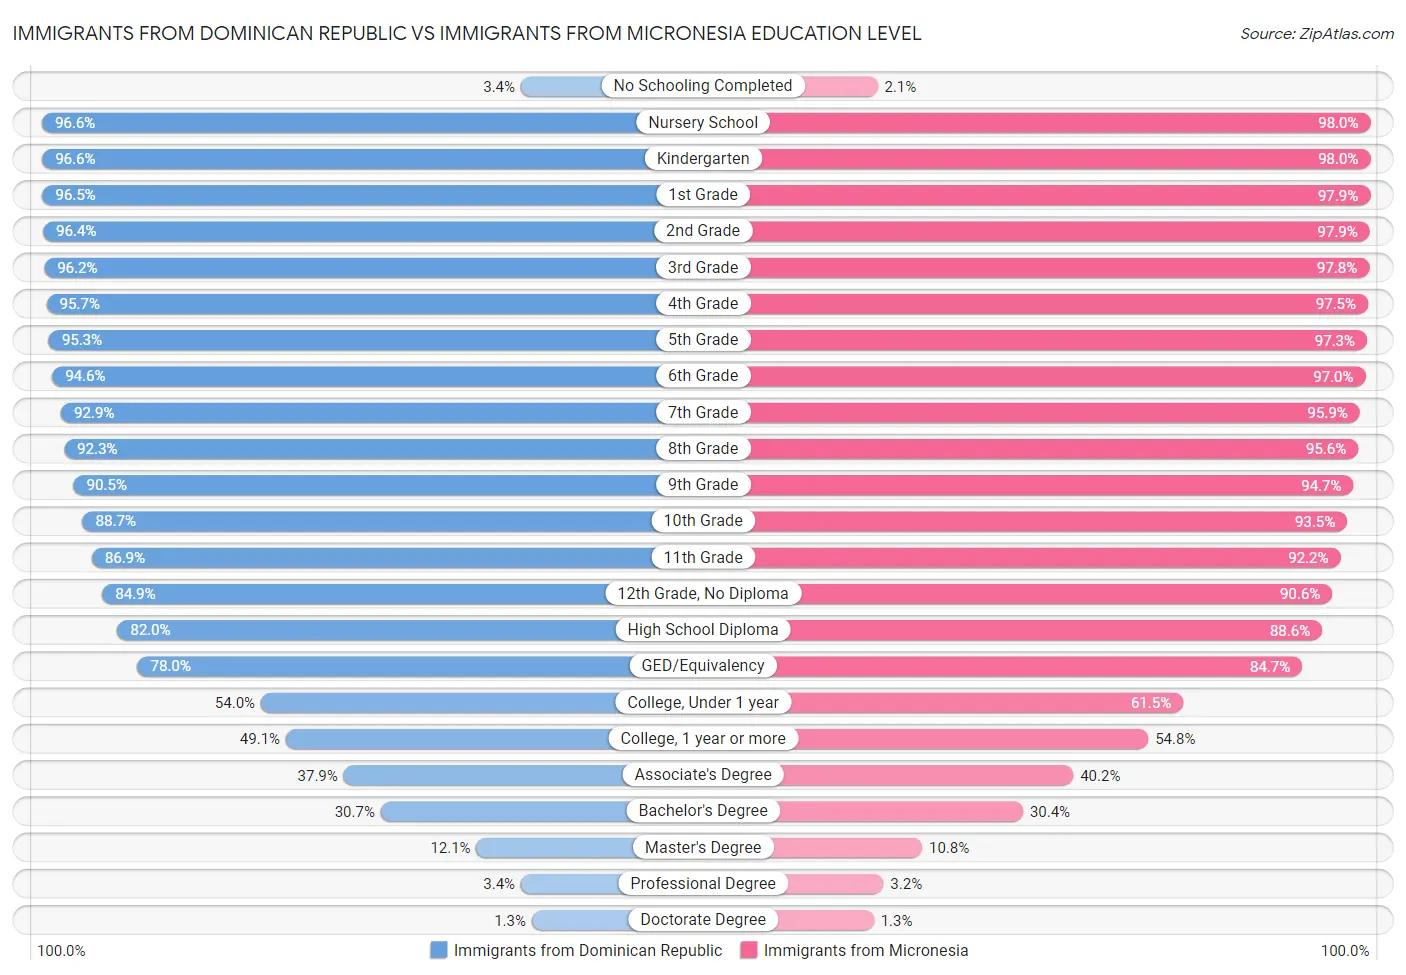 Immigrants from Dominican Republic vs Immigrants from Micronesia Education Level